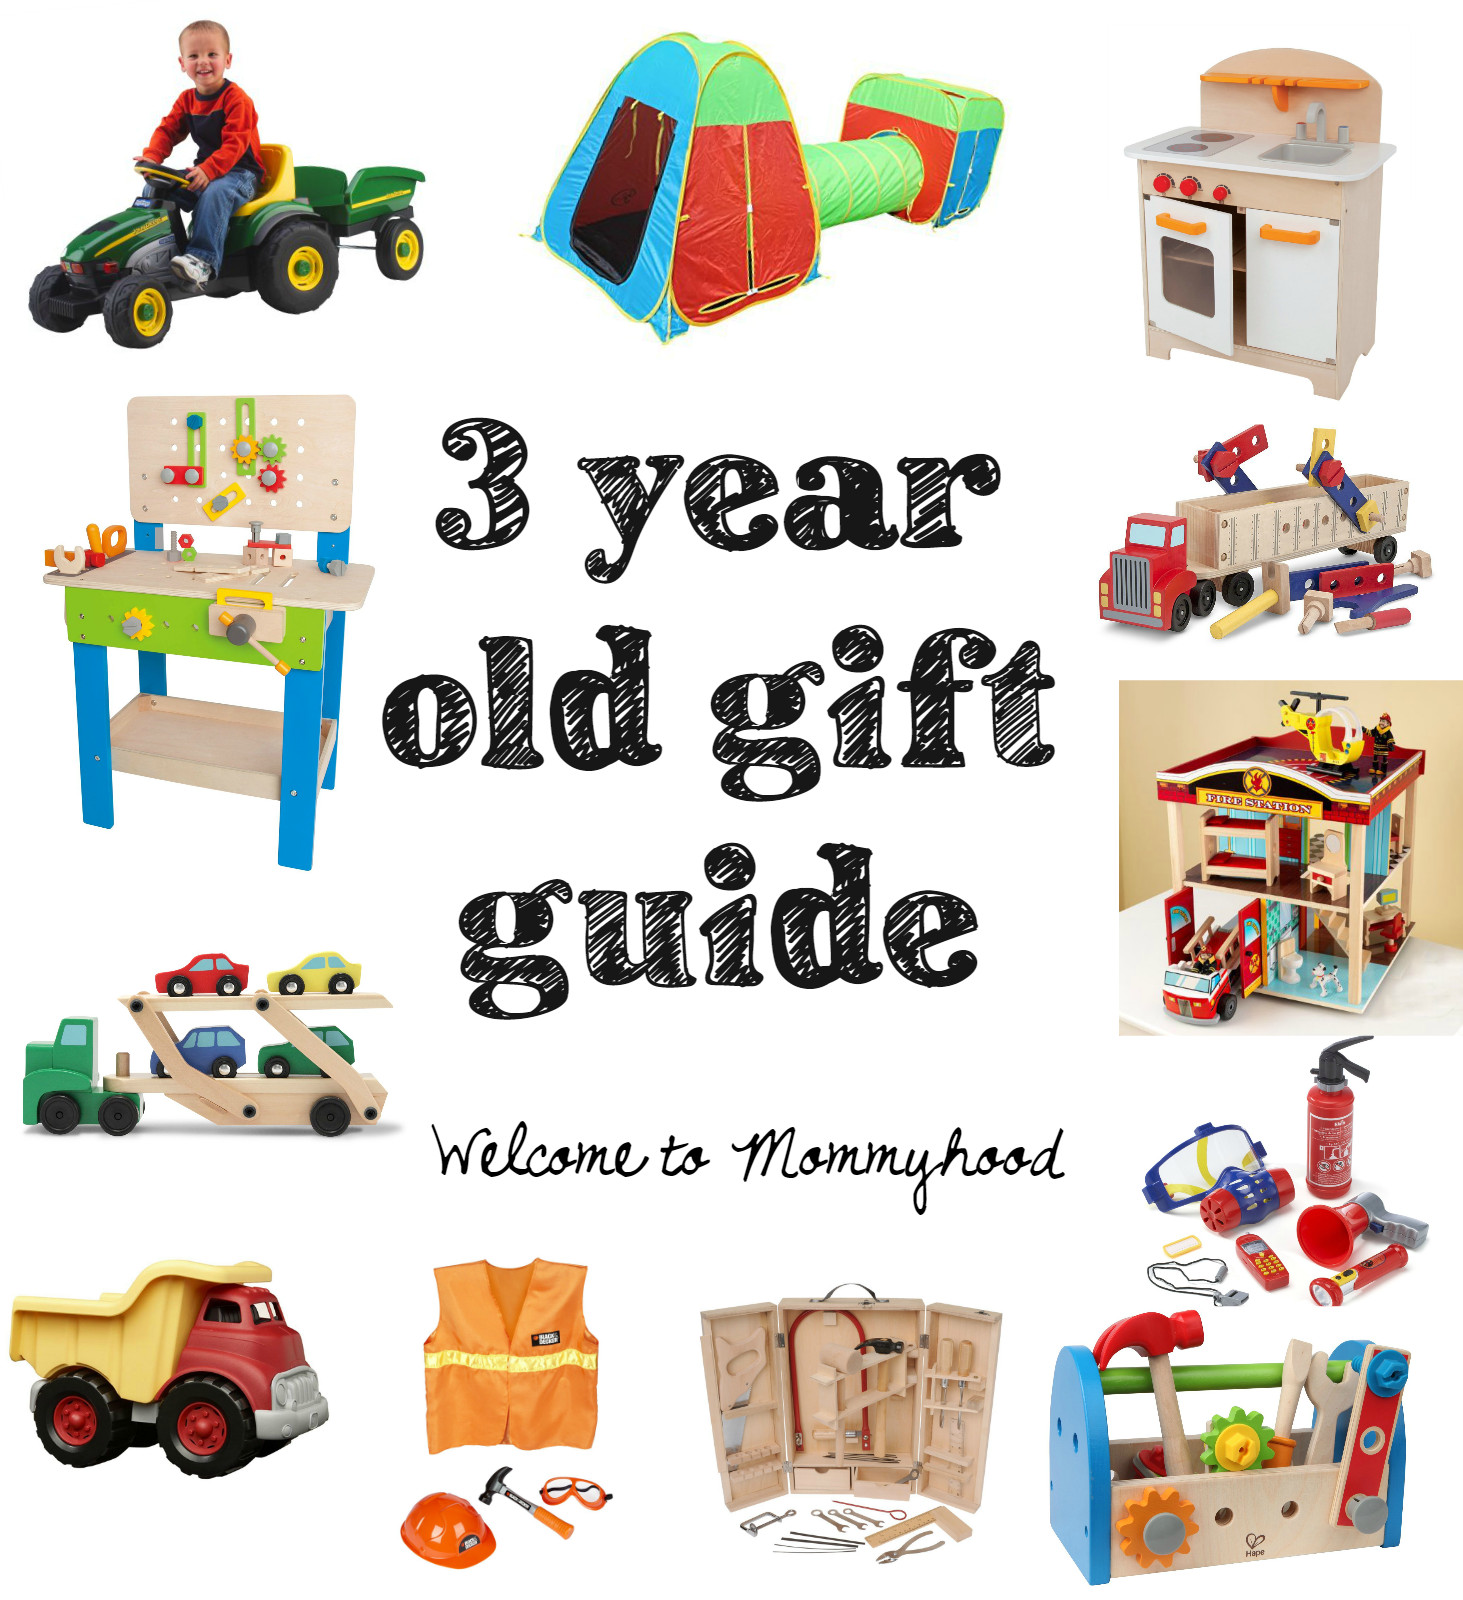 3 Year Old Gift Ideas Boys
 Gift guide for three year old boys from Wel e to